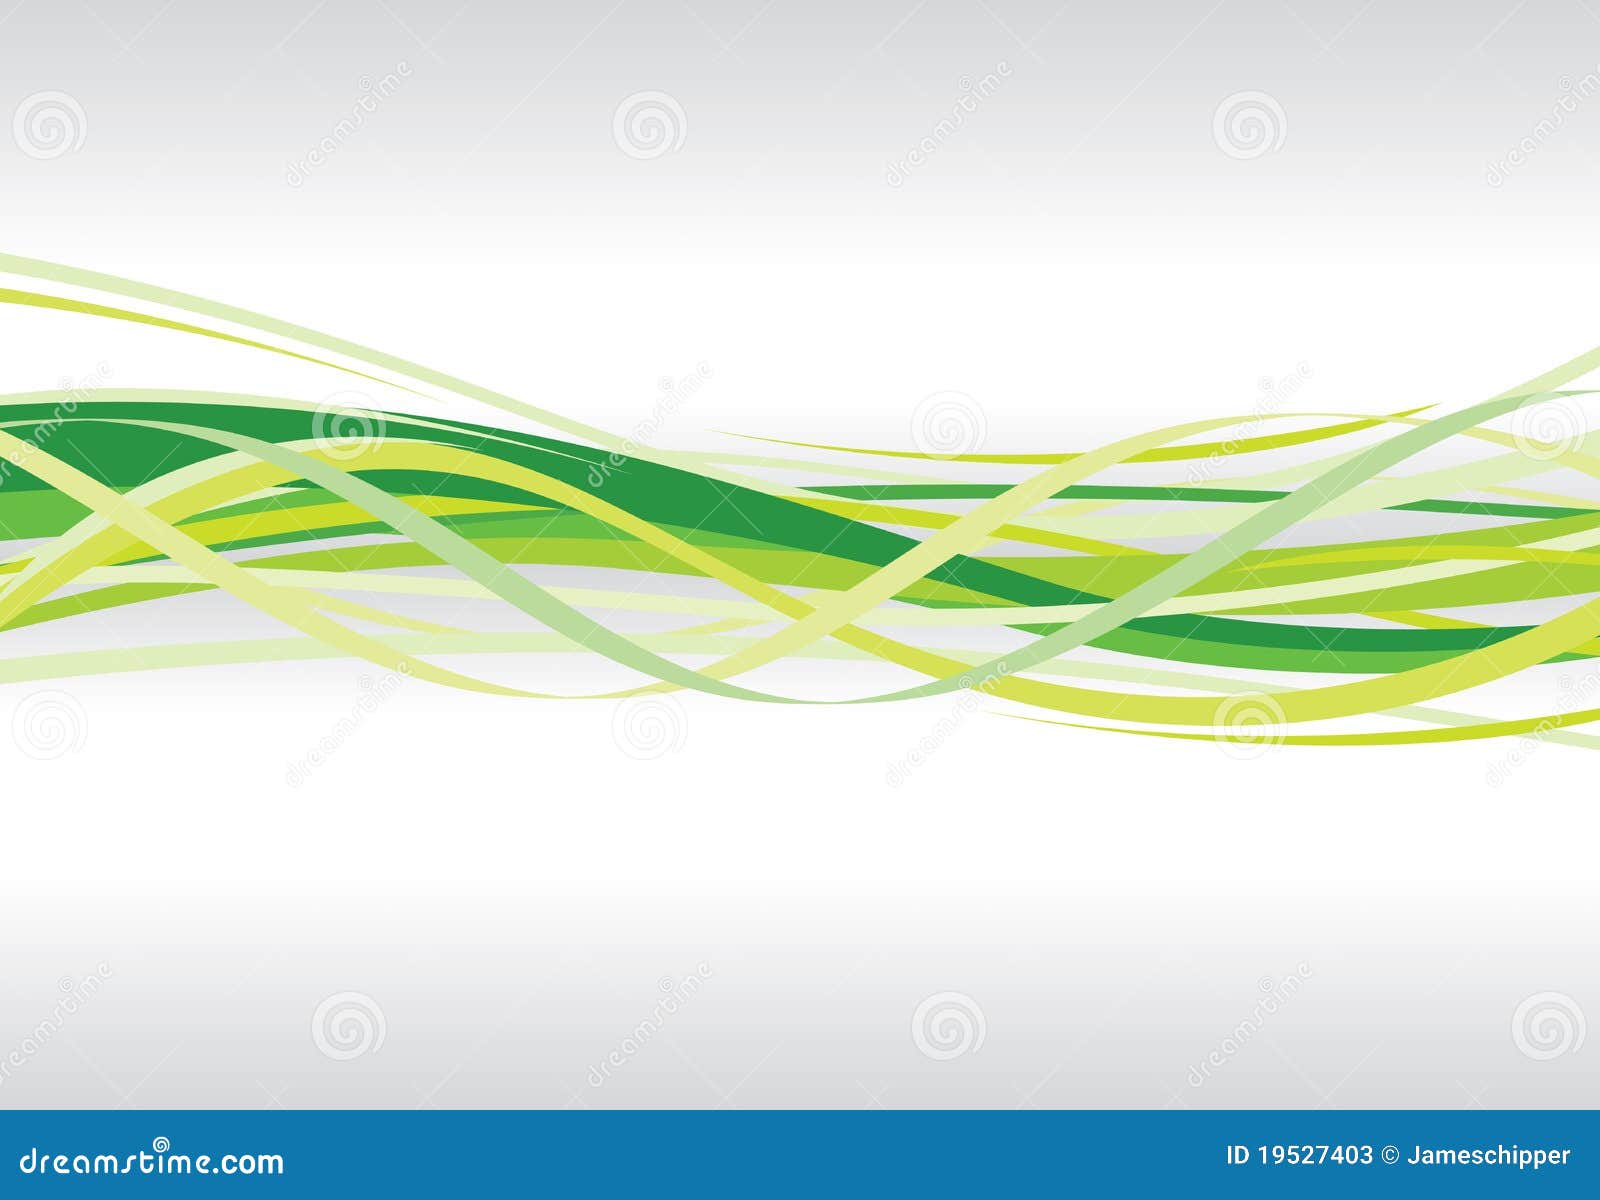 Abstract Green Swirl Stock Illustrations – 96,739 Abstract Green ...